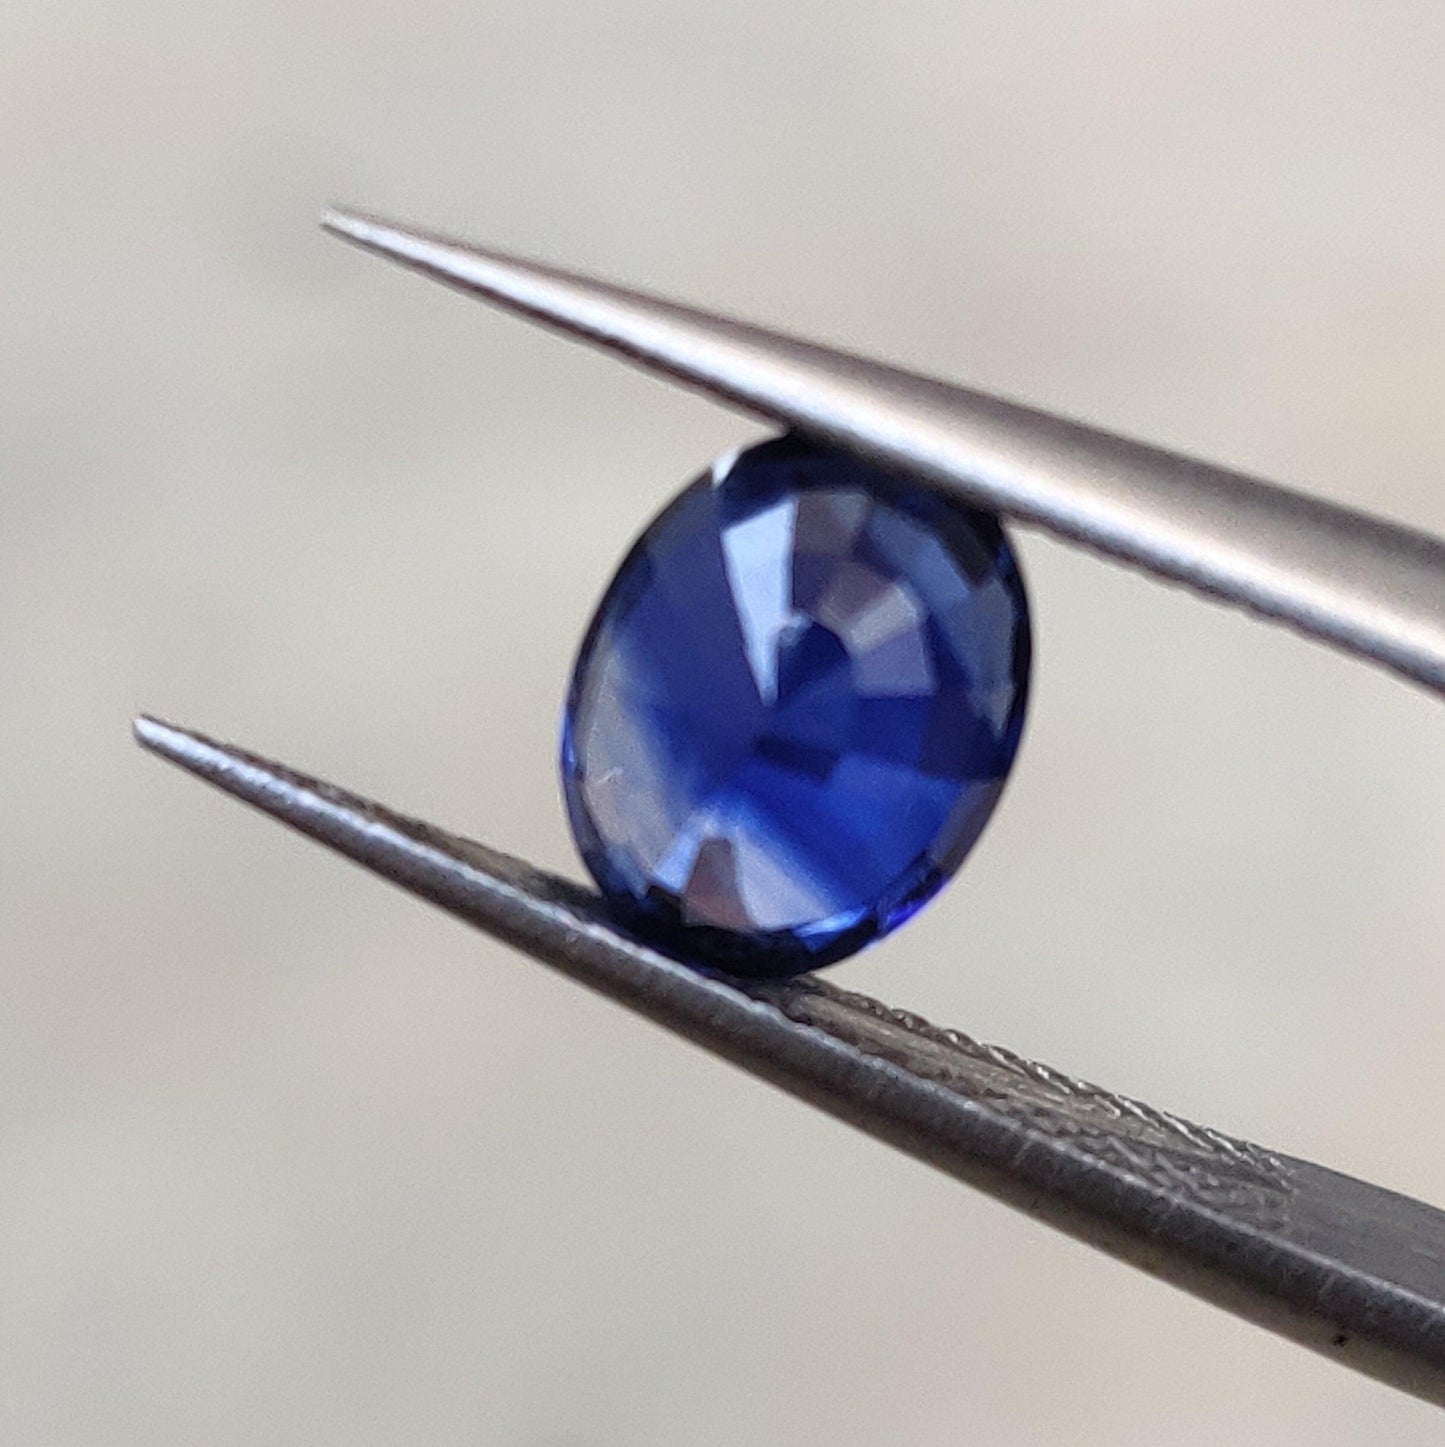 Blue Sapphire Natural Heated 2.07ct